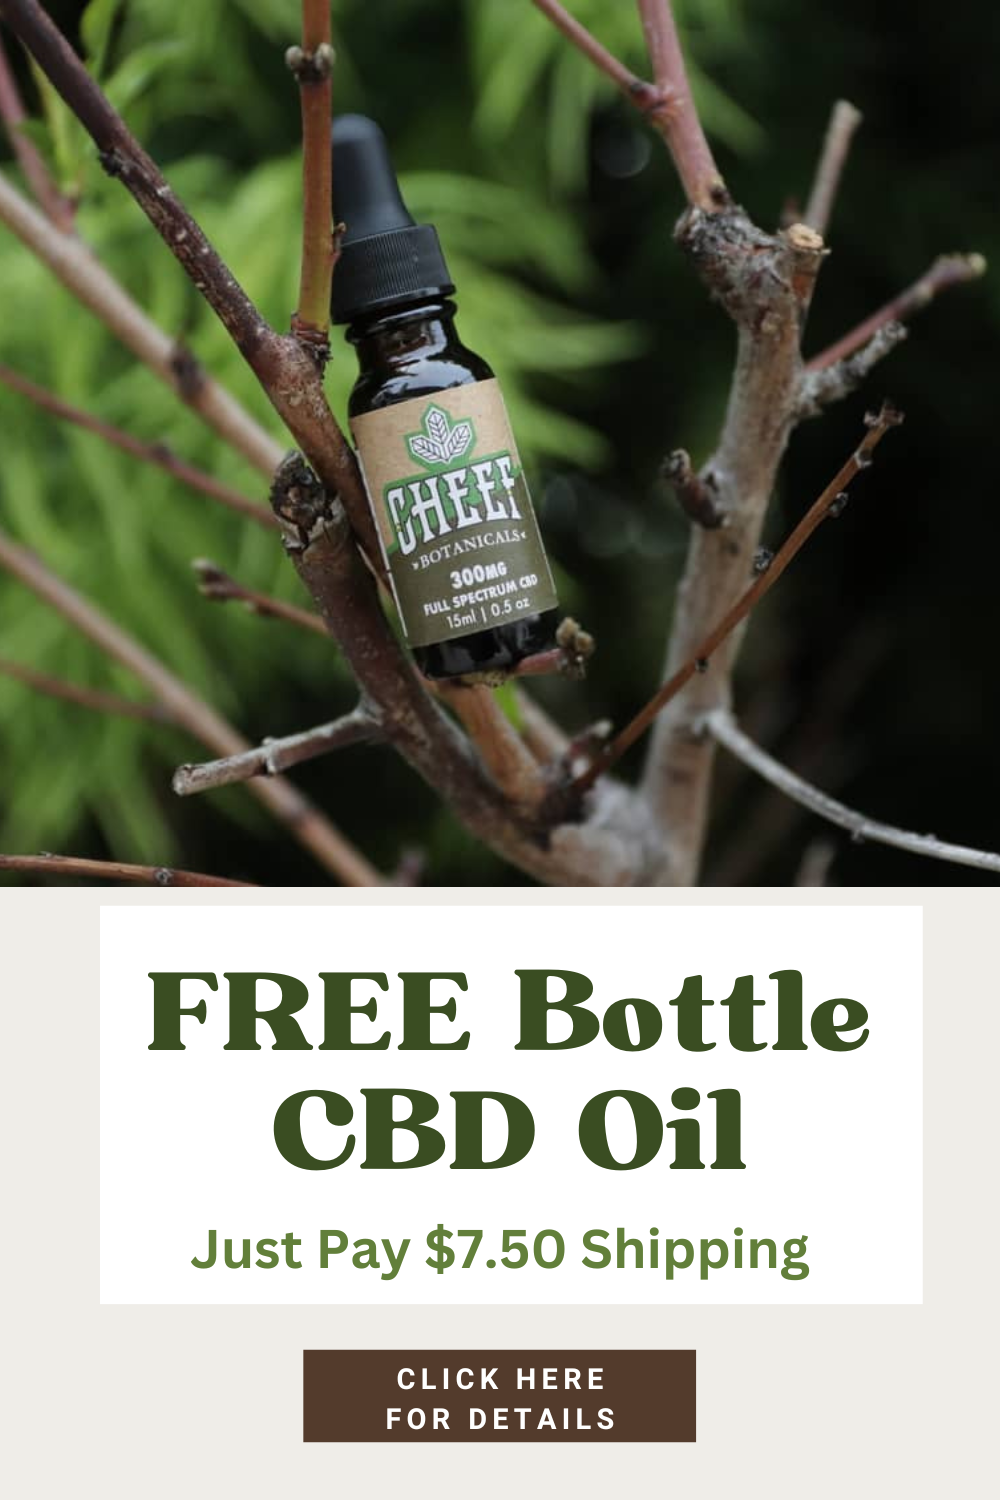 Cheef Botanicals is giving away free bottles of their 300mg Full Spectrum CBD oil